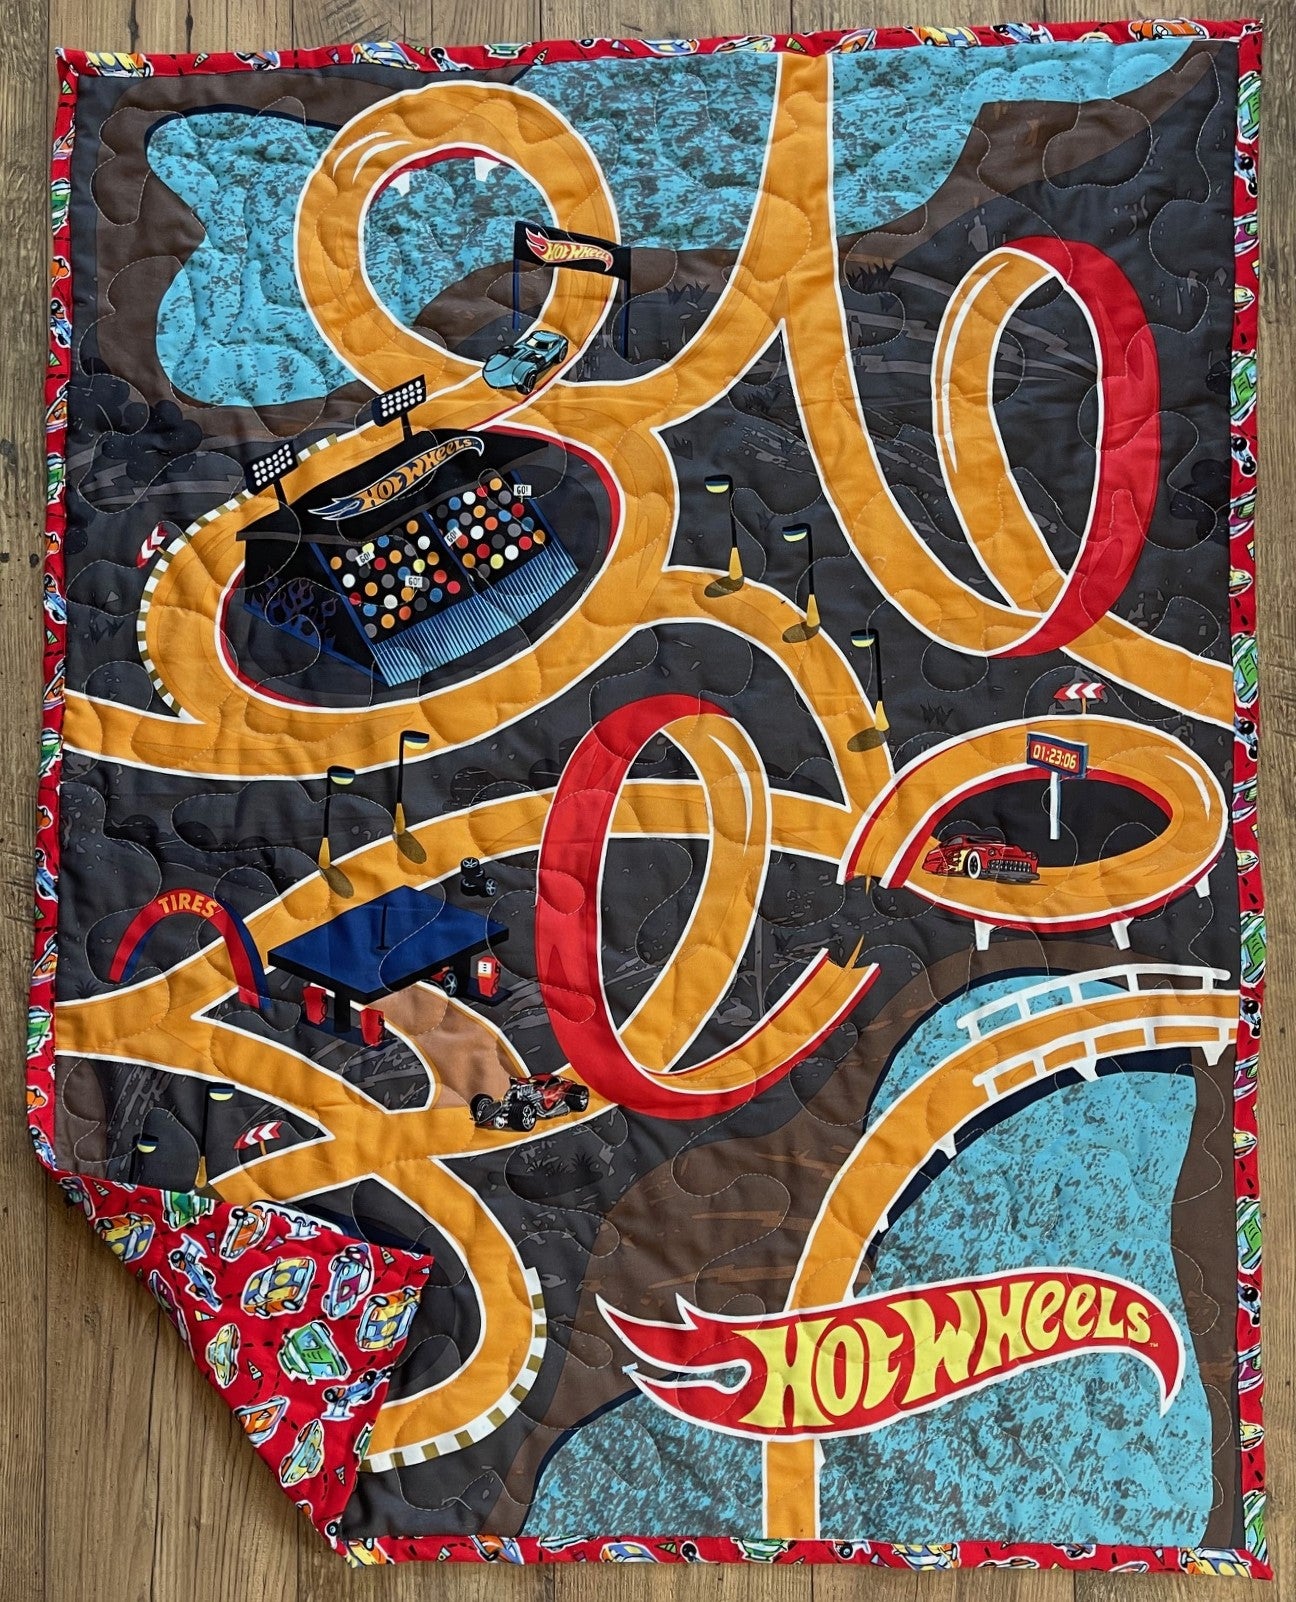 HOT WHEELS CARS RACE TRACK INSPIRED QUILTED BLANKET